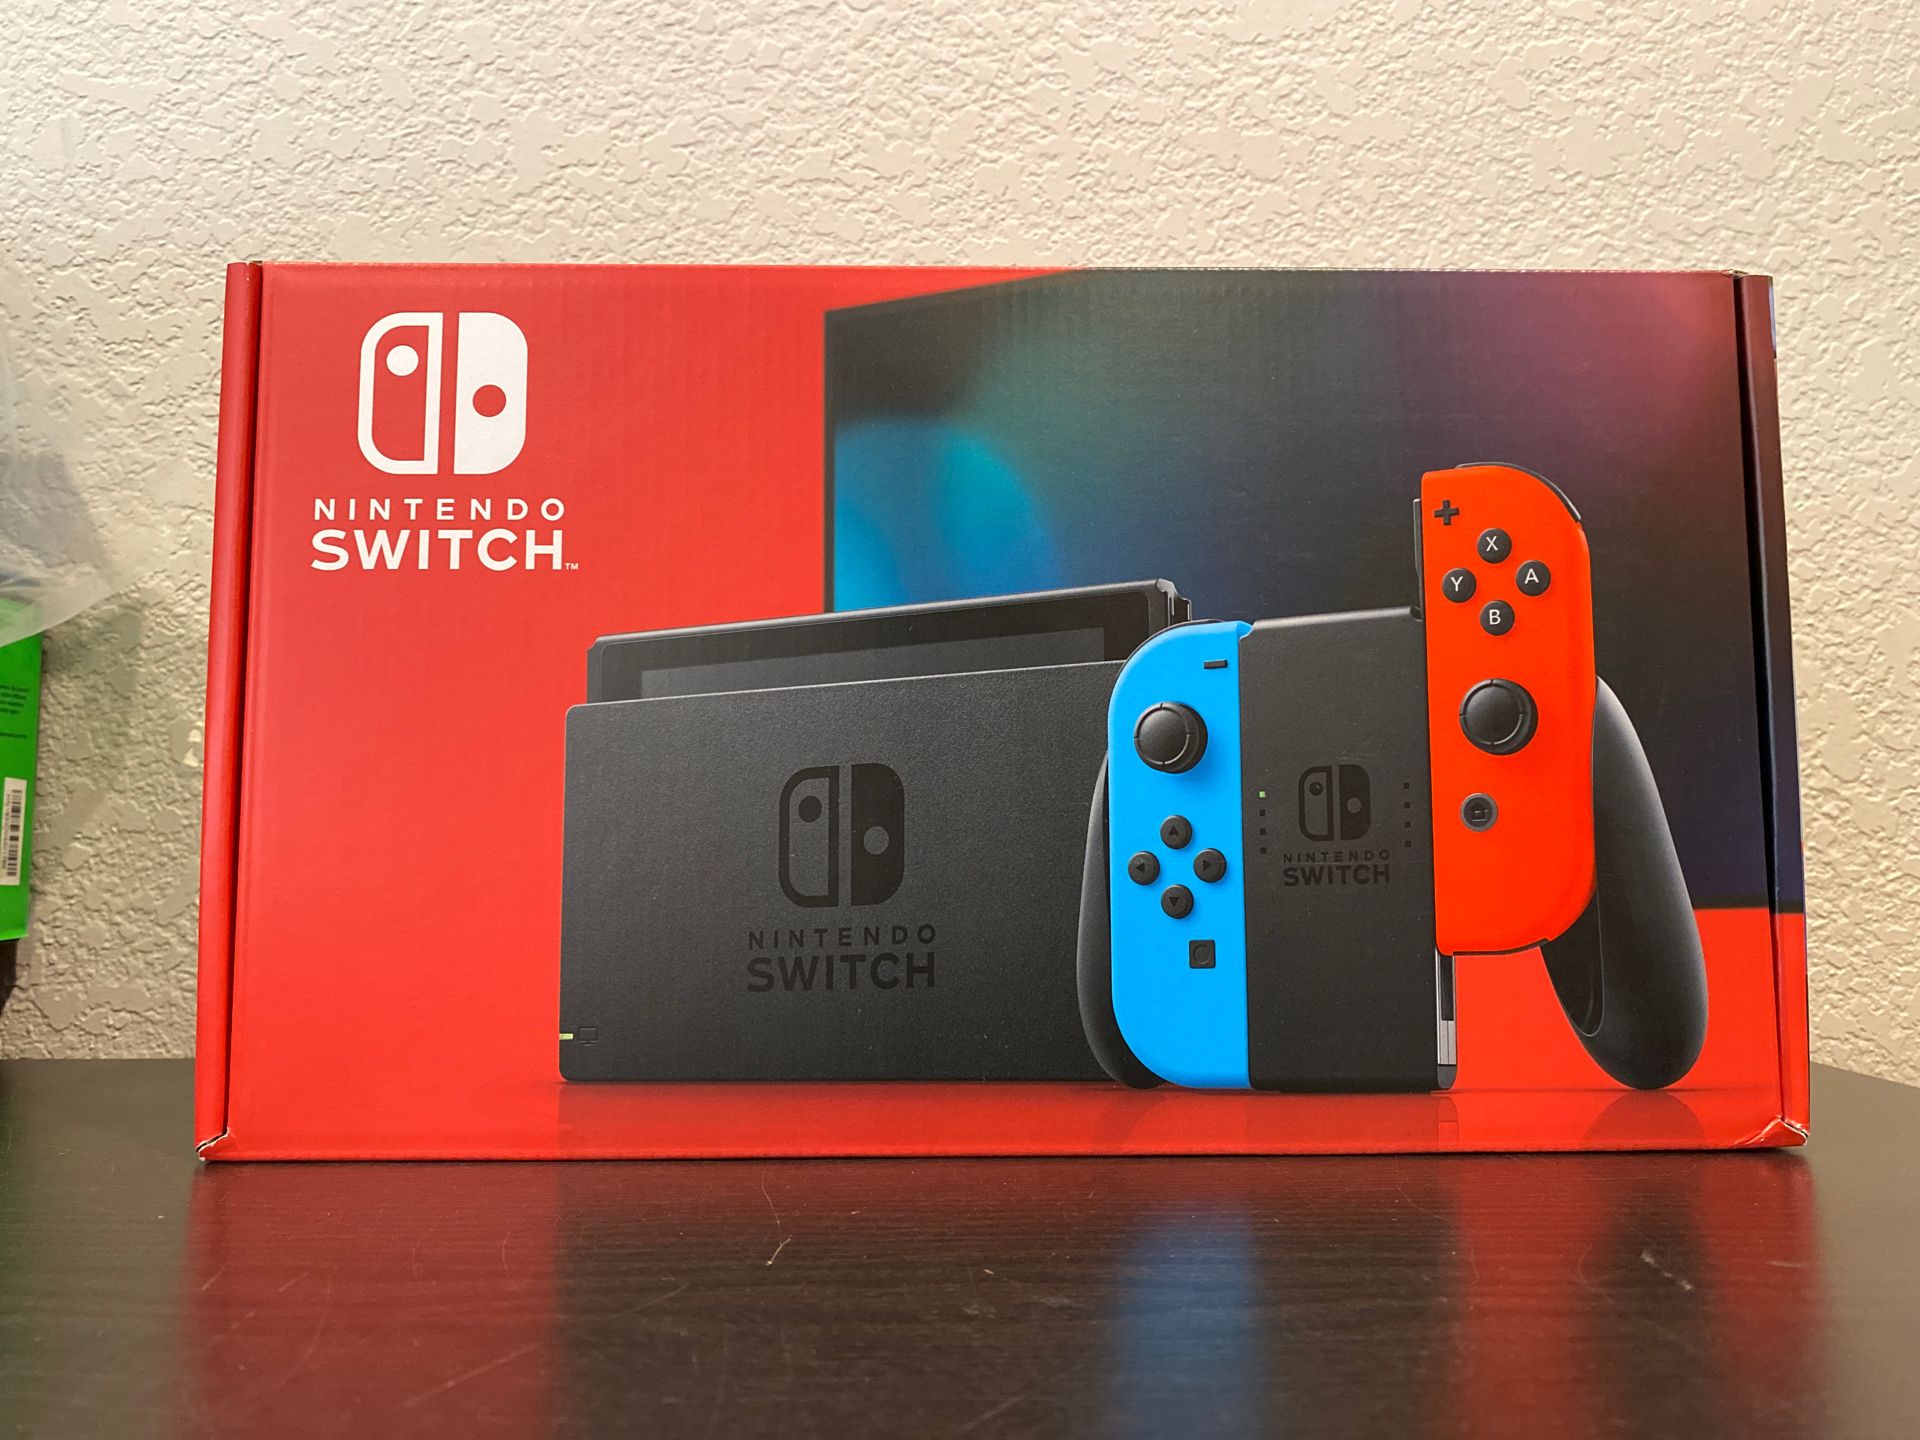 New Nintendo Switch Console v2 - Neon Red and Blue